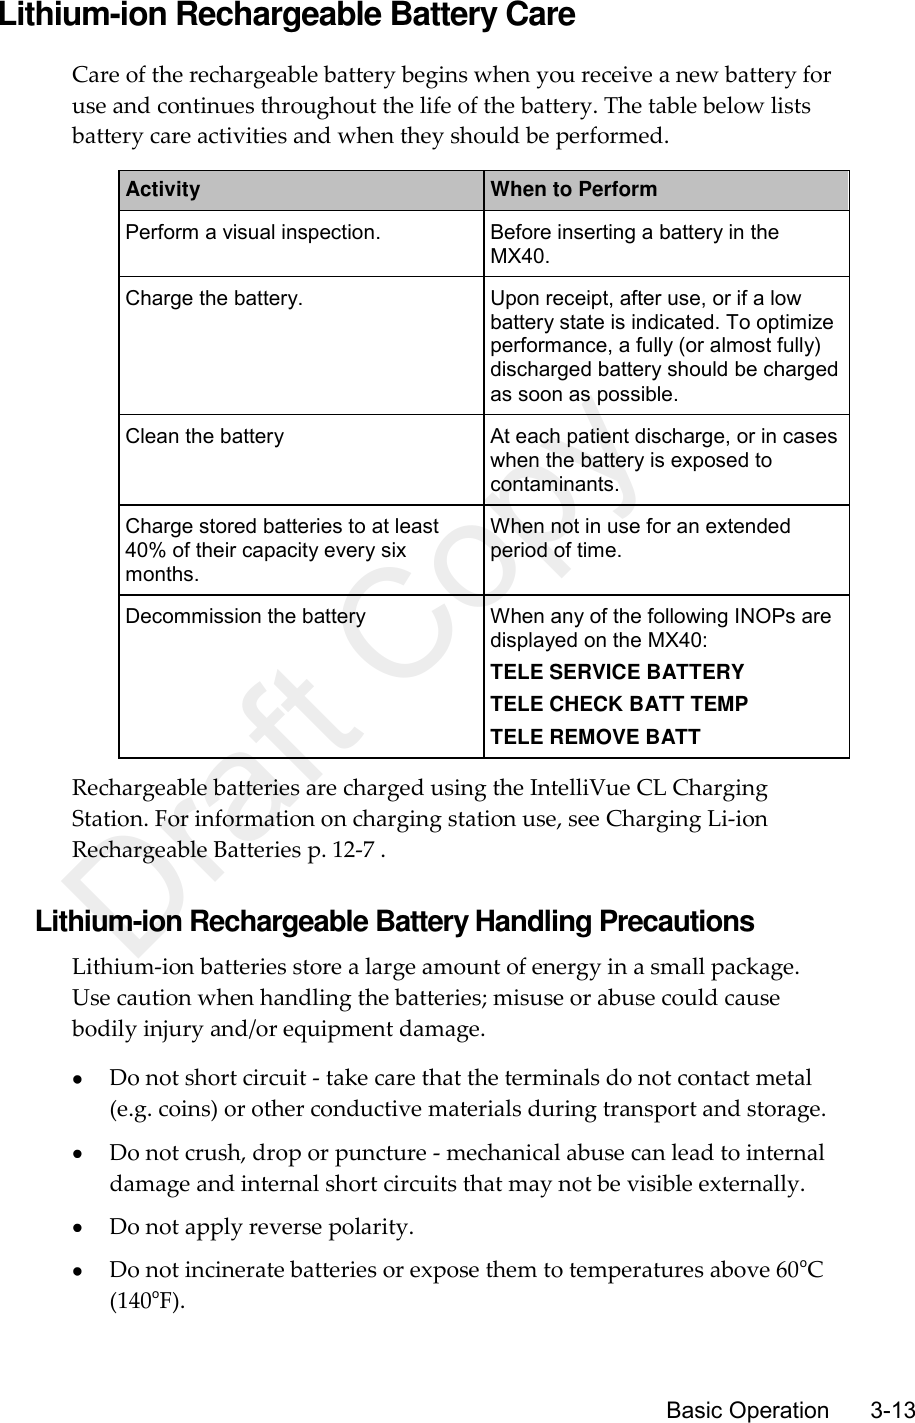      Basic Operation      3-13 Lithium-ion Rechargeable Battery Care Care of the rechargeable battery begins when you receive a new battery for use and continues throughout the life of the battery. The table below lists battery care activities and when they should be performed. Activity When to Perform Perform a visual inspection. Before inserting a battery in the MX40. Charge the battery. Upon receipt, after use, or if a low battery state is indicated. To optimize performance, a fully (or almost fully) discharged battery should be charged as soon as possible. Clean the battery At each patient discharge, or in cases when the battery is exposed to contaminants. Charge stored batteries to at least 40% of their capacity every six months. When not in use for an extended period of time. Decommission the battery When any of the following INOPs are displayed on the MX40: TELE SERVICE BATTERY TELE CHECK BATT TEMP TELE REMOVE BATT Rechargeable batteries are charged using the IntelliVue CL Charging Station. For information on charging station use, see Charging Li-ion Rechargeable Batteries p. 12-7 .  Lithium-ion Rechargeable Battery Handling Precautions Lithium-ion batteries store a large amount of energy in a small package. Use caution when handling the batteries; misuse or abuse could cause bodily injury and/or equipment damage.  Do not short circuit - take care that the terminals do not contact metal (e.g. coins) or other conductive materials during transport and storage.  Do not crush, drop or puncture - mechanical abuse can lead to internal damage and internal short circuits that may not be visible externally.  Do not apply reverse polarity.  Do not incinerate batteries or expose them to temperatures above 60oC (140oF). Draft Copy